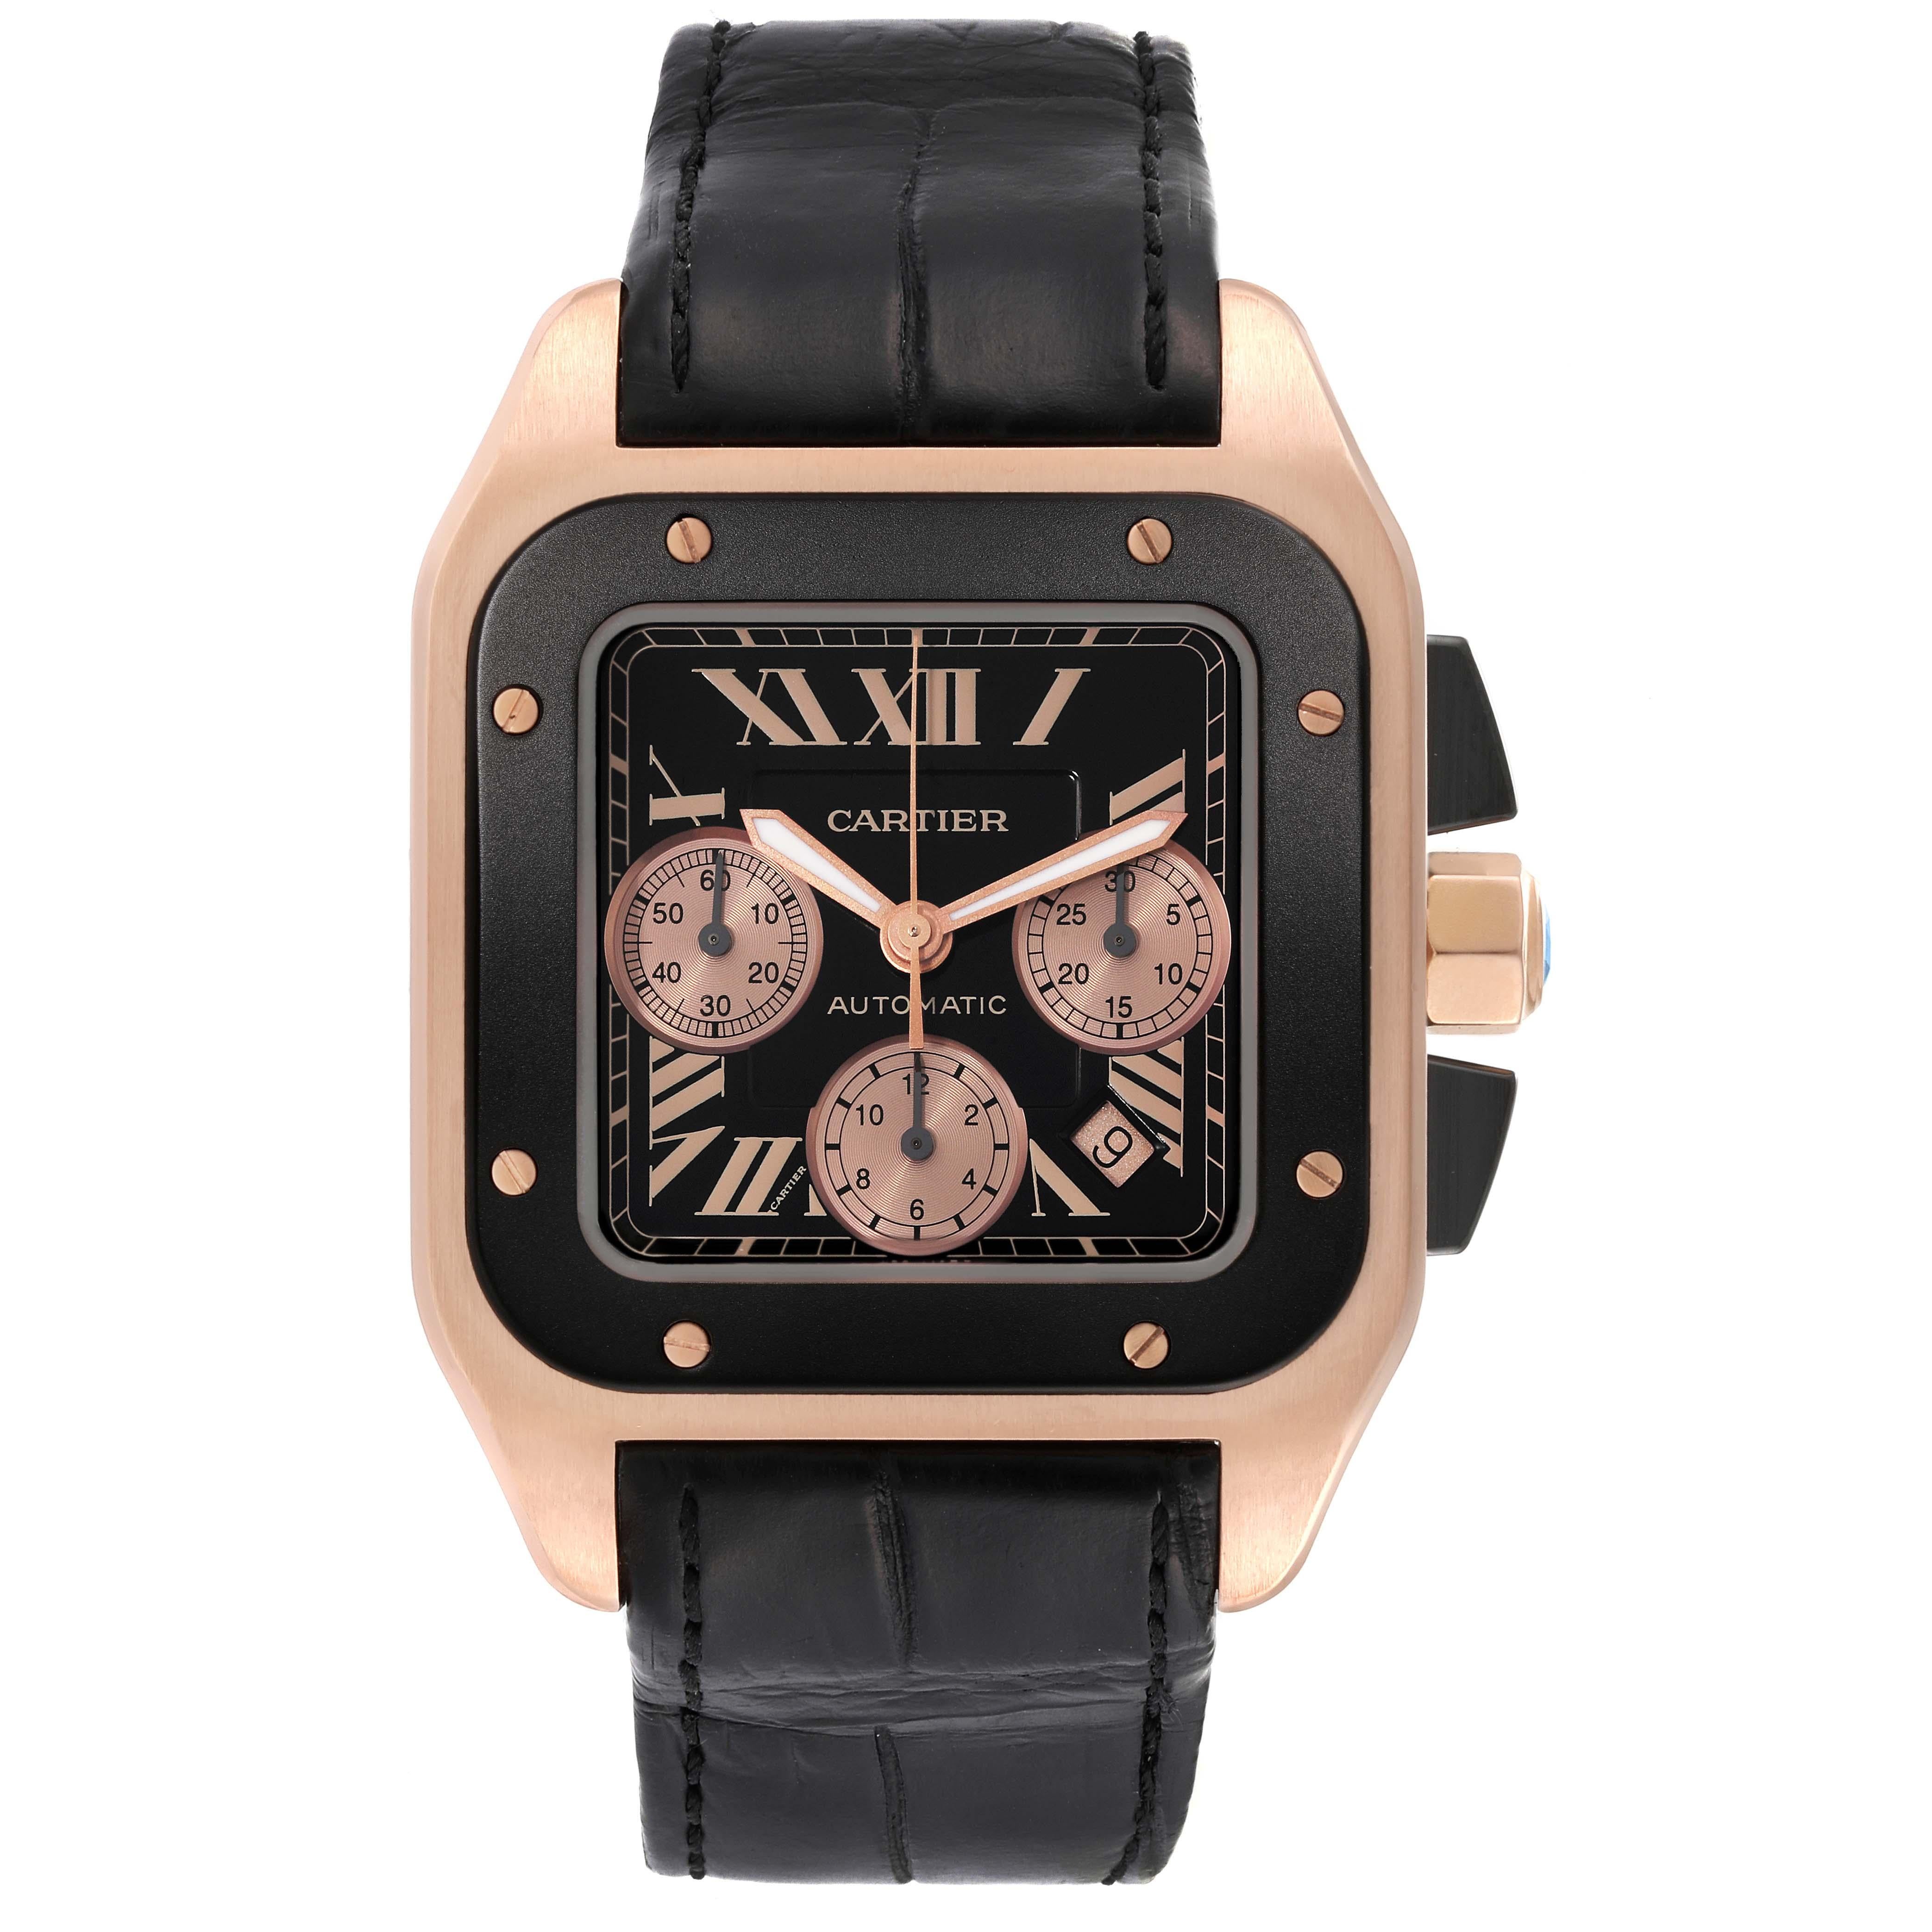 Cartier Santos 100 XL Rose Gold Chronograph Mens Watch W2020003. Automatic self-winding movement. Three body rose gold case 54.9 mm x 46.55 mm. Octagonal crown set with black faceted spinel. Black ADLC coated bezel punctuated with 8 signature rose